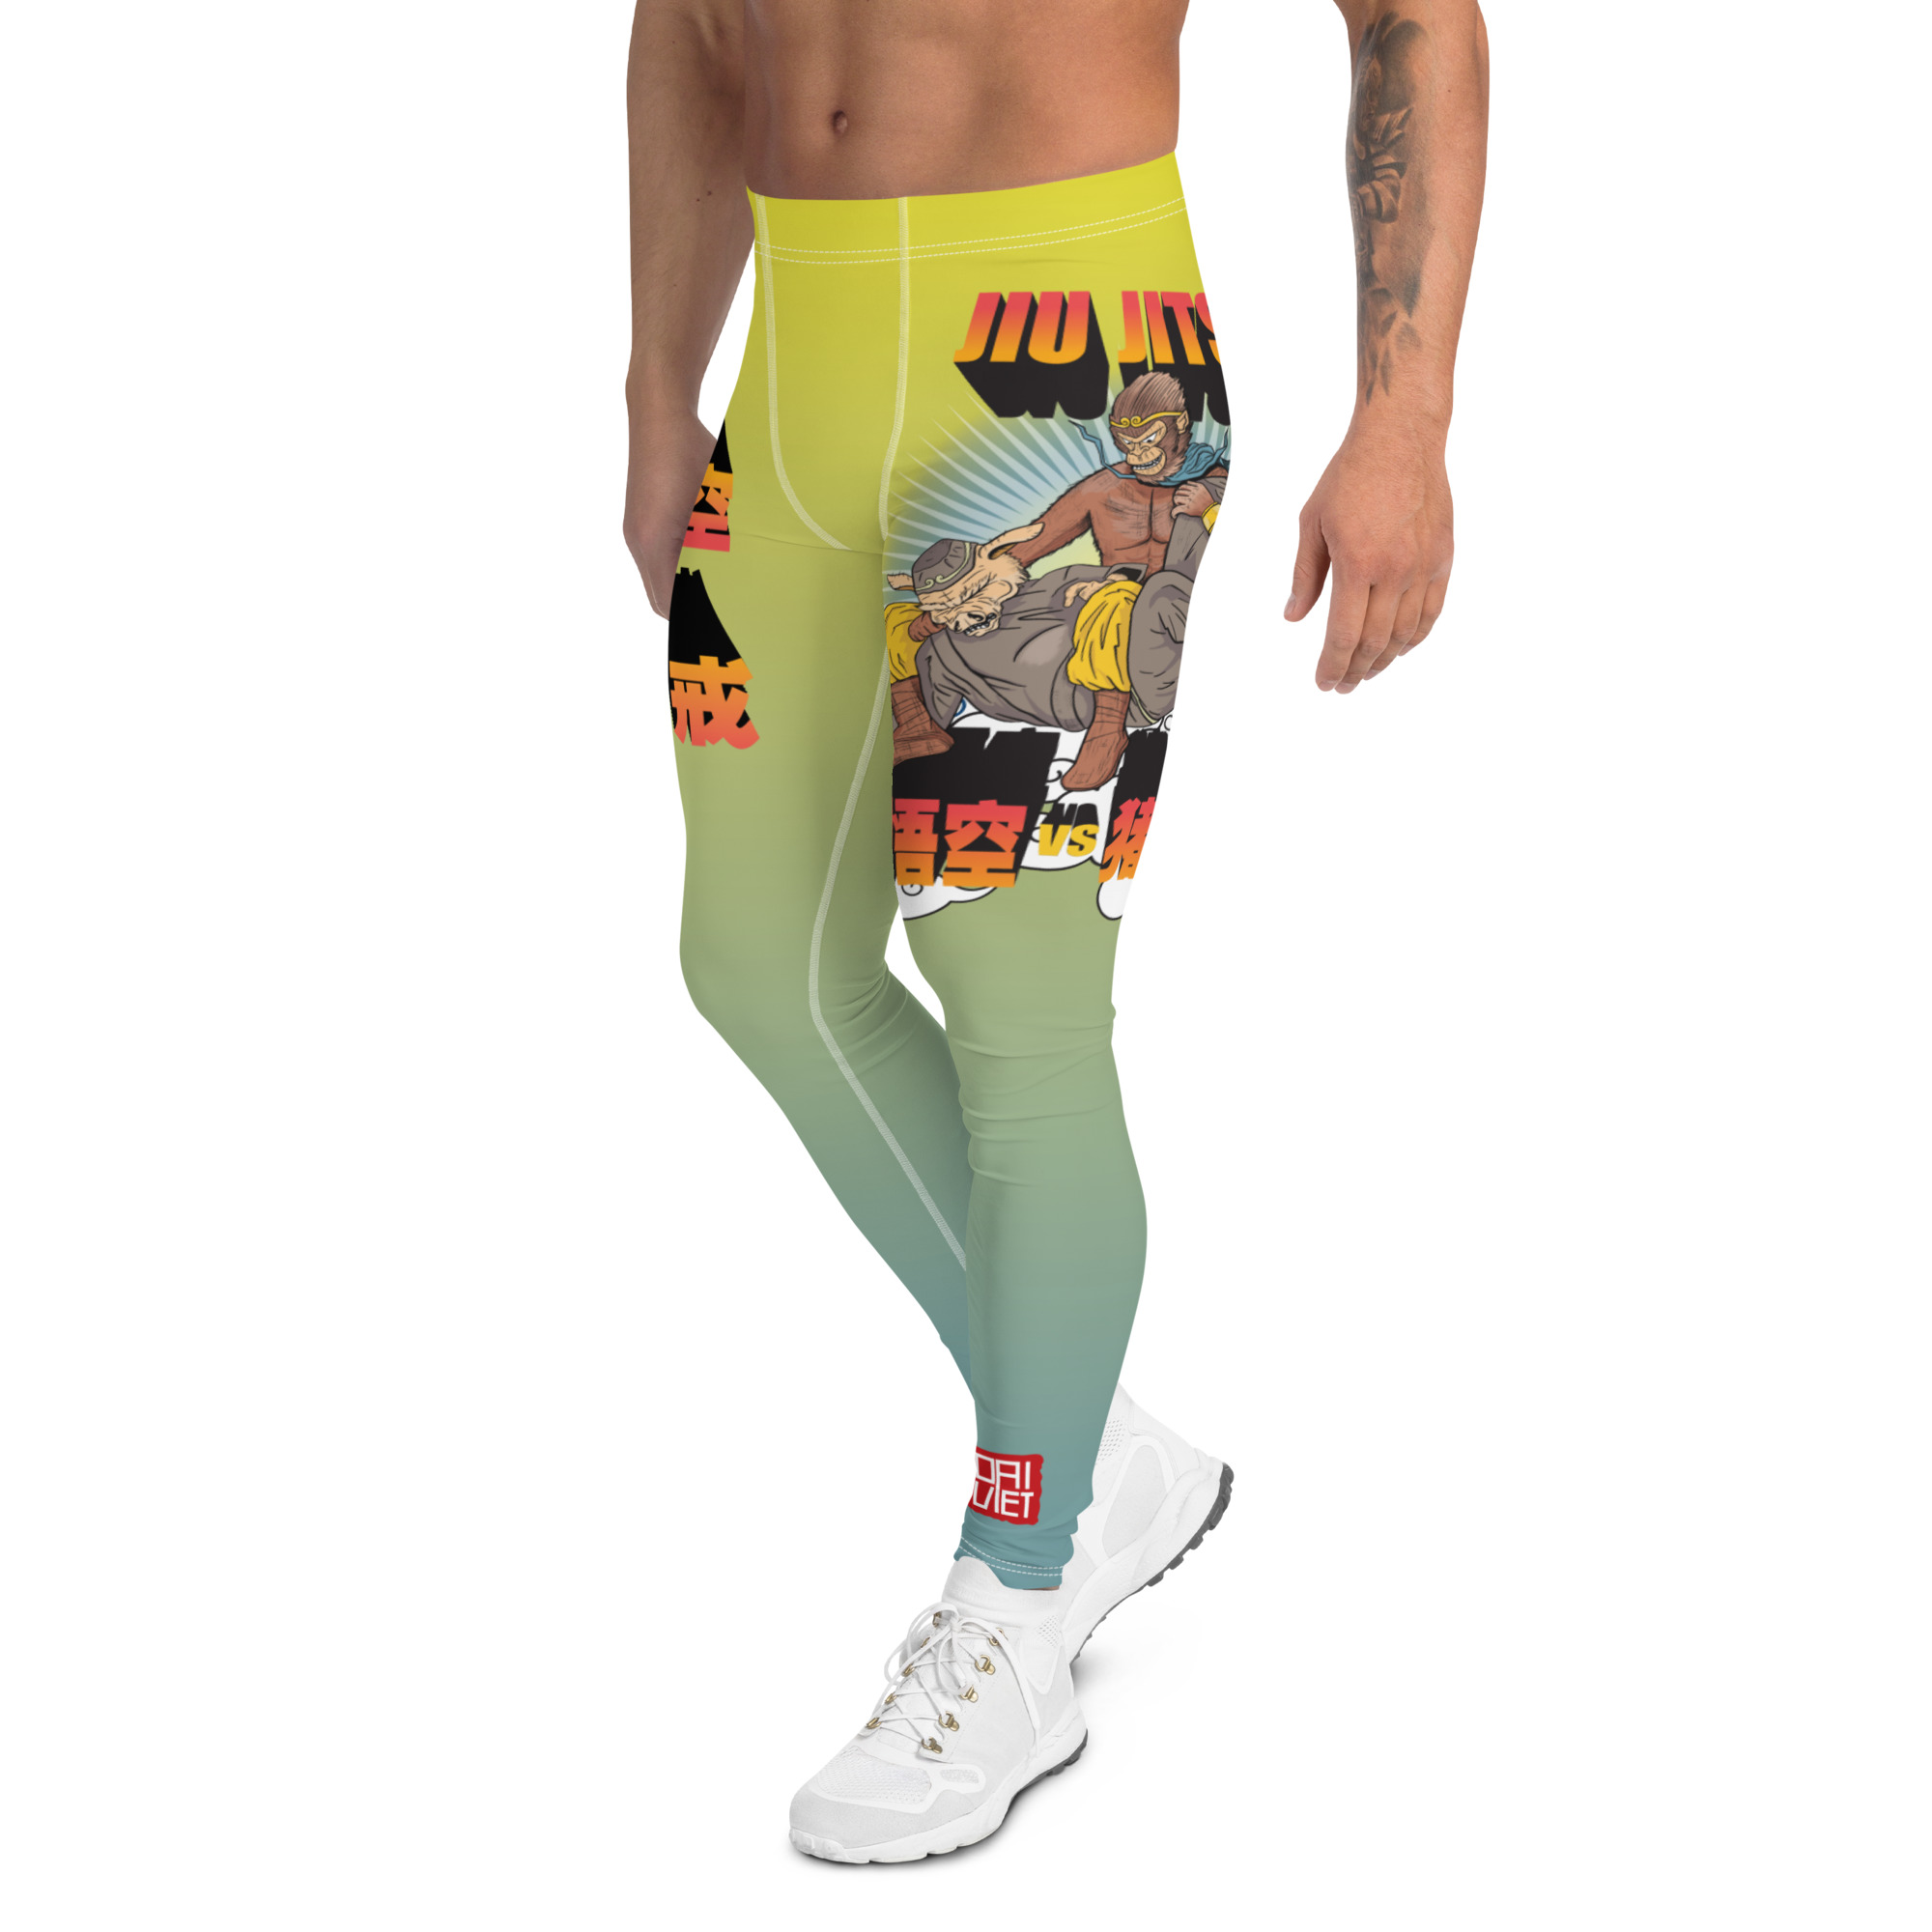 BJJ Men’s Tights Spats – Sun Wukong Do Bow And Arrow Submission On Zhu Bajie 4